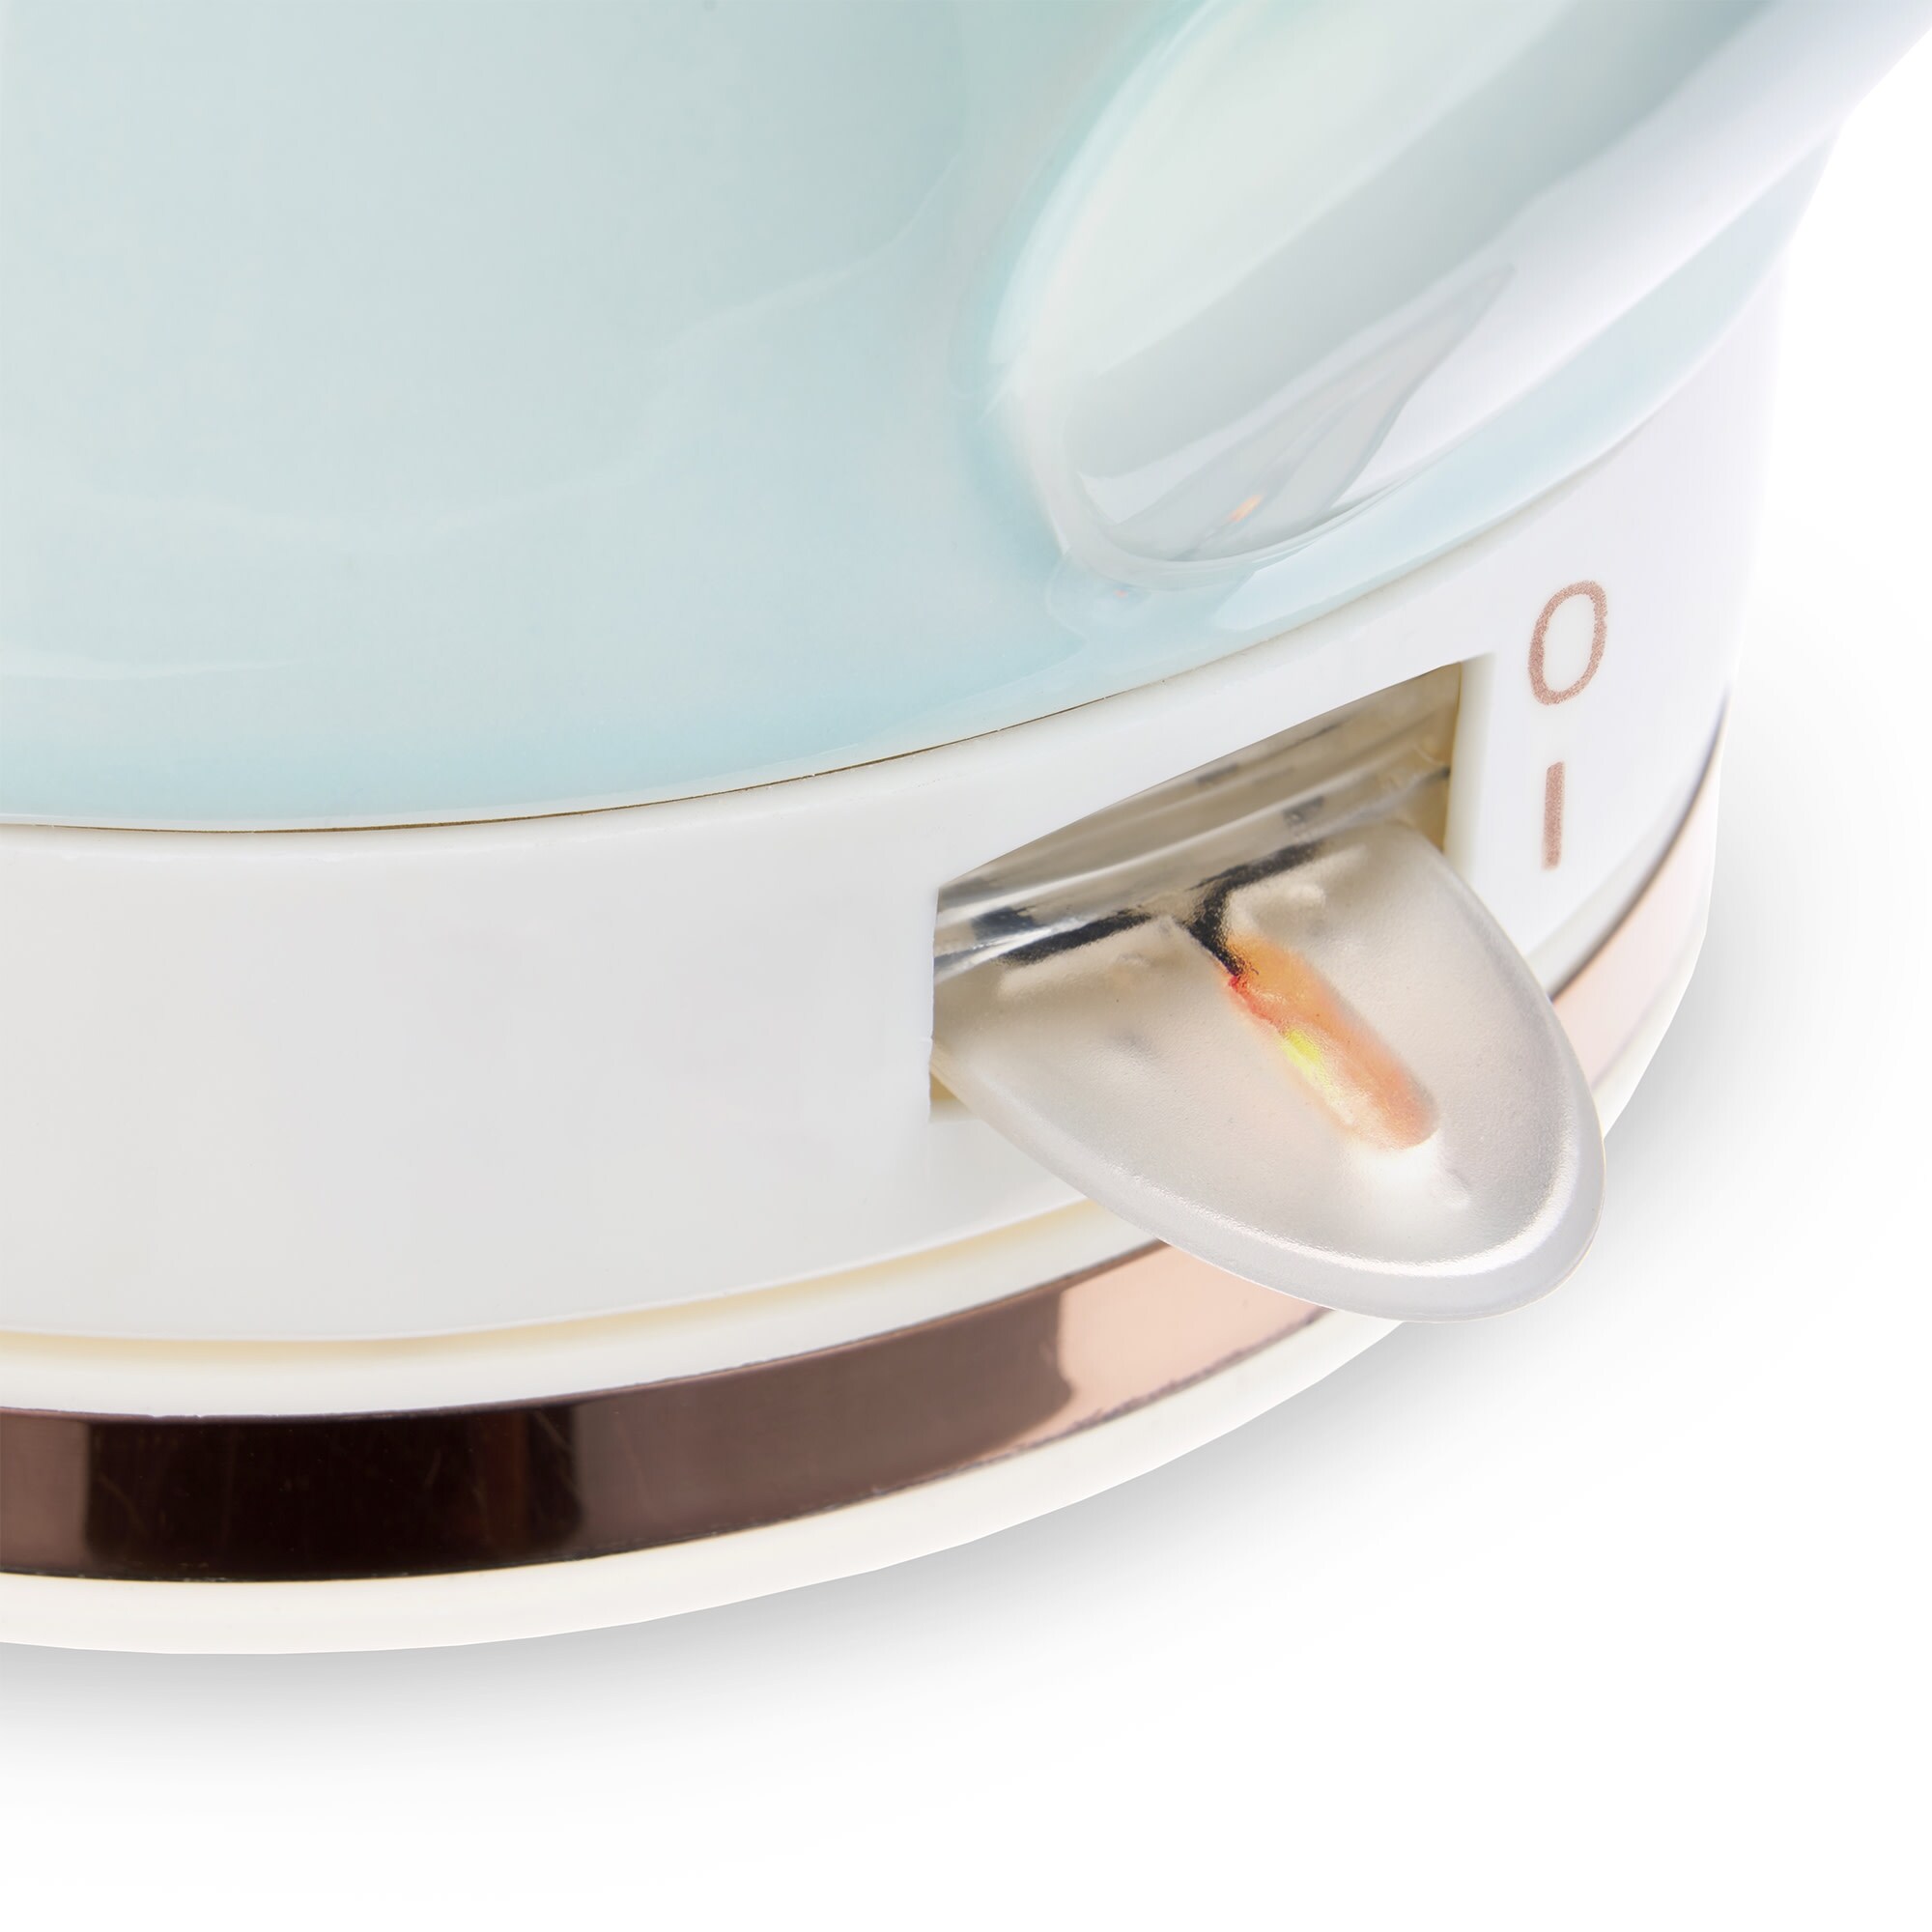 https://ak1.ostkcdn.com/images/products/is/images/direct/cd461d88854f21c98f93cd3768e5d0642a62a219/Noelle-Ceramic-Electric-Tea-Kettle-by-Pinky-Up.jpg